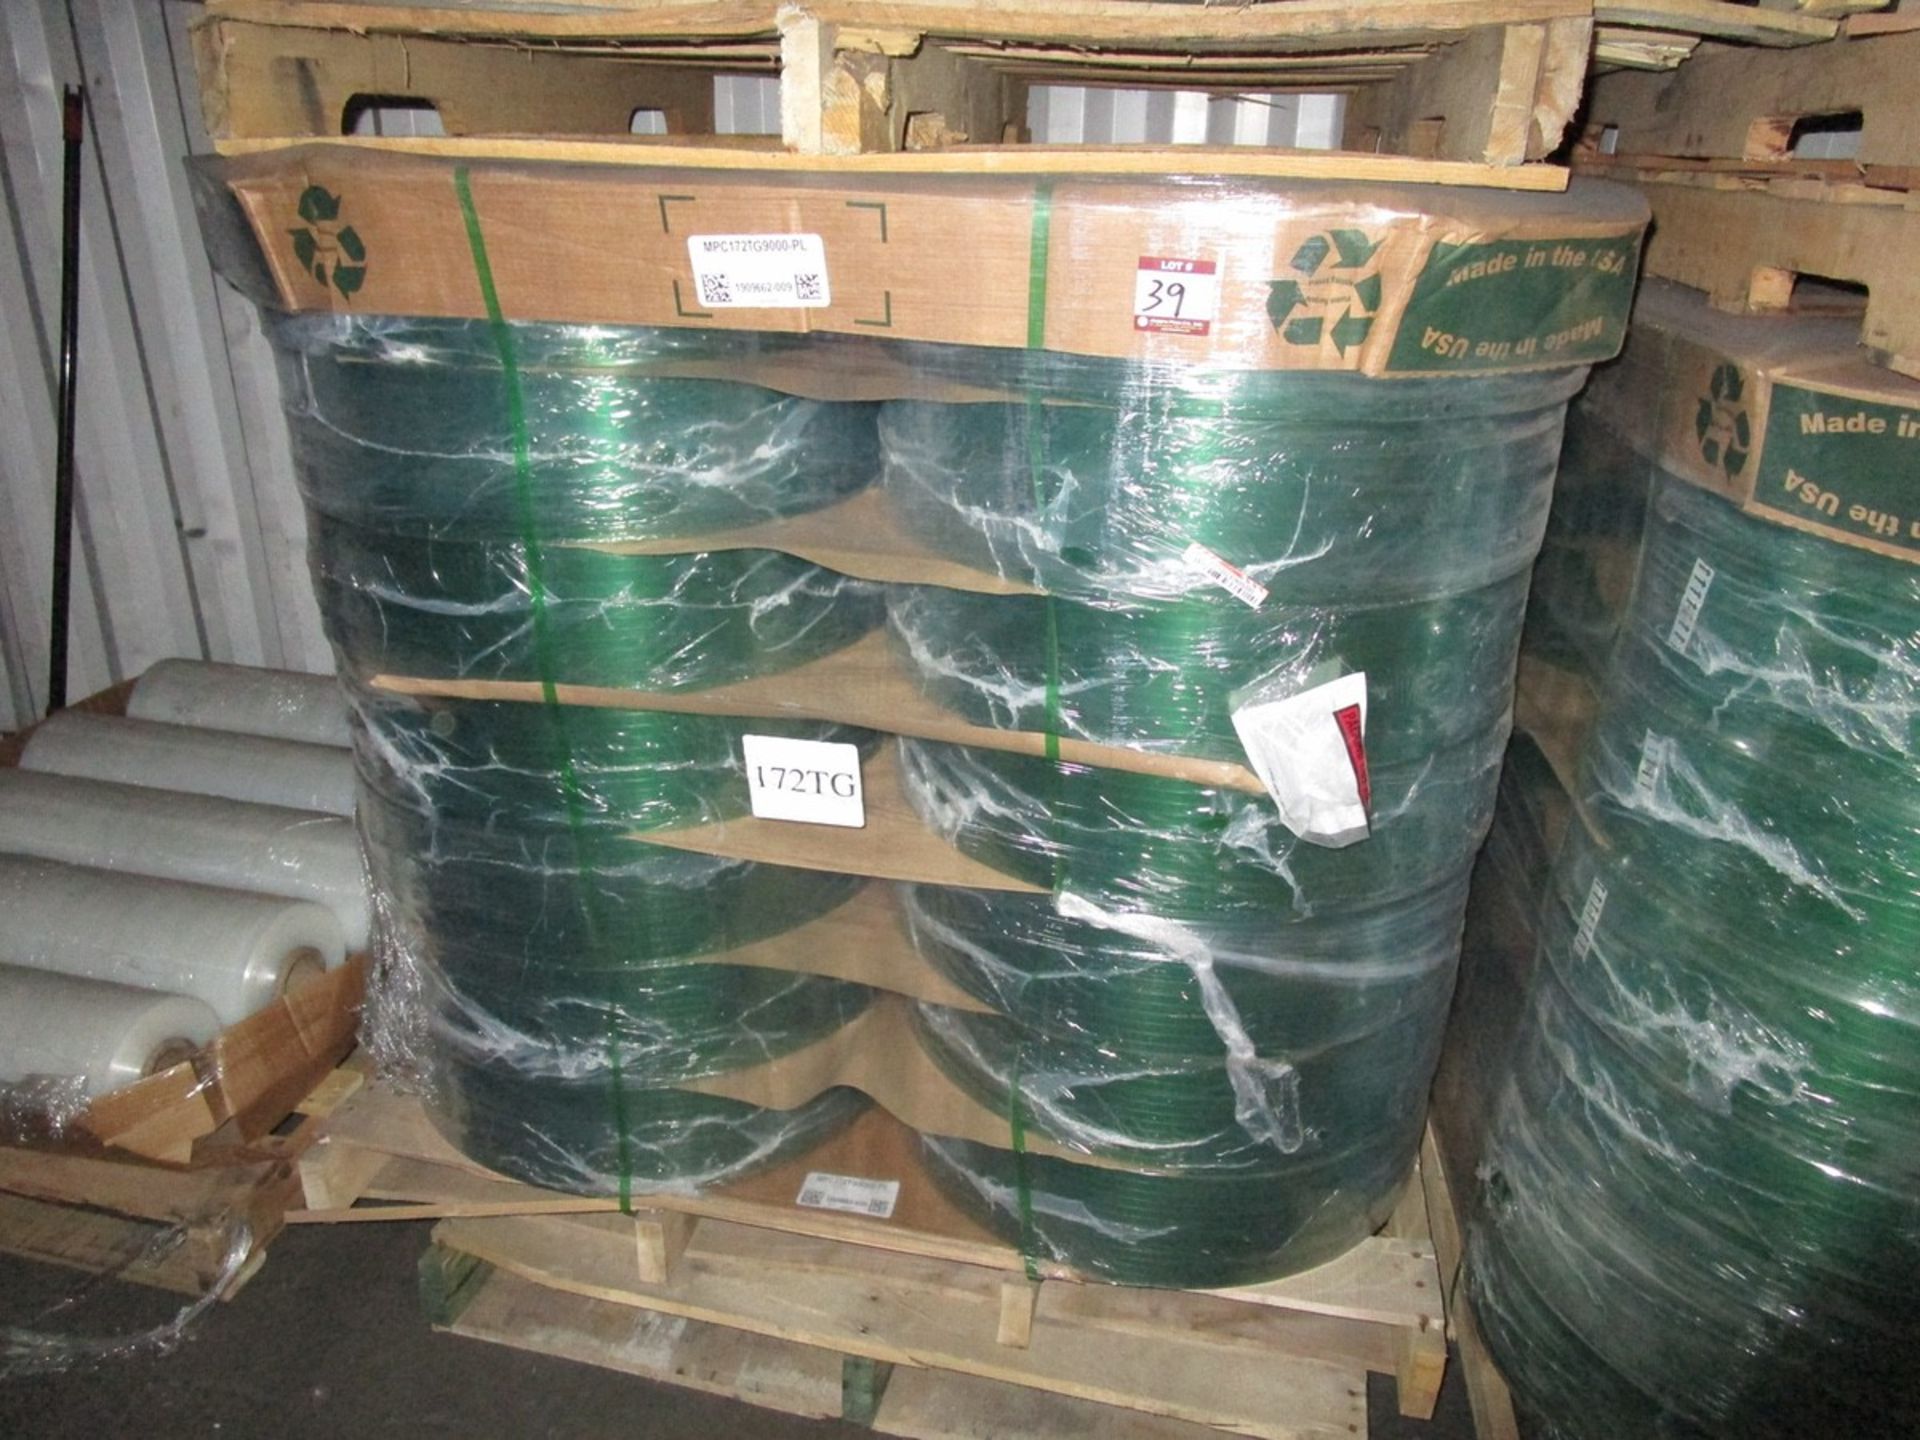 Skid of Plastic Strapping Model MPC172TG9000PL, 28 Rolls | Rig Fee: $50